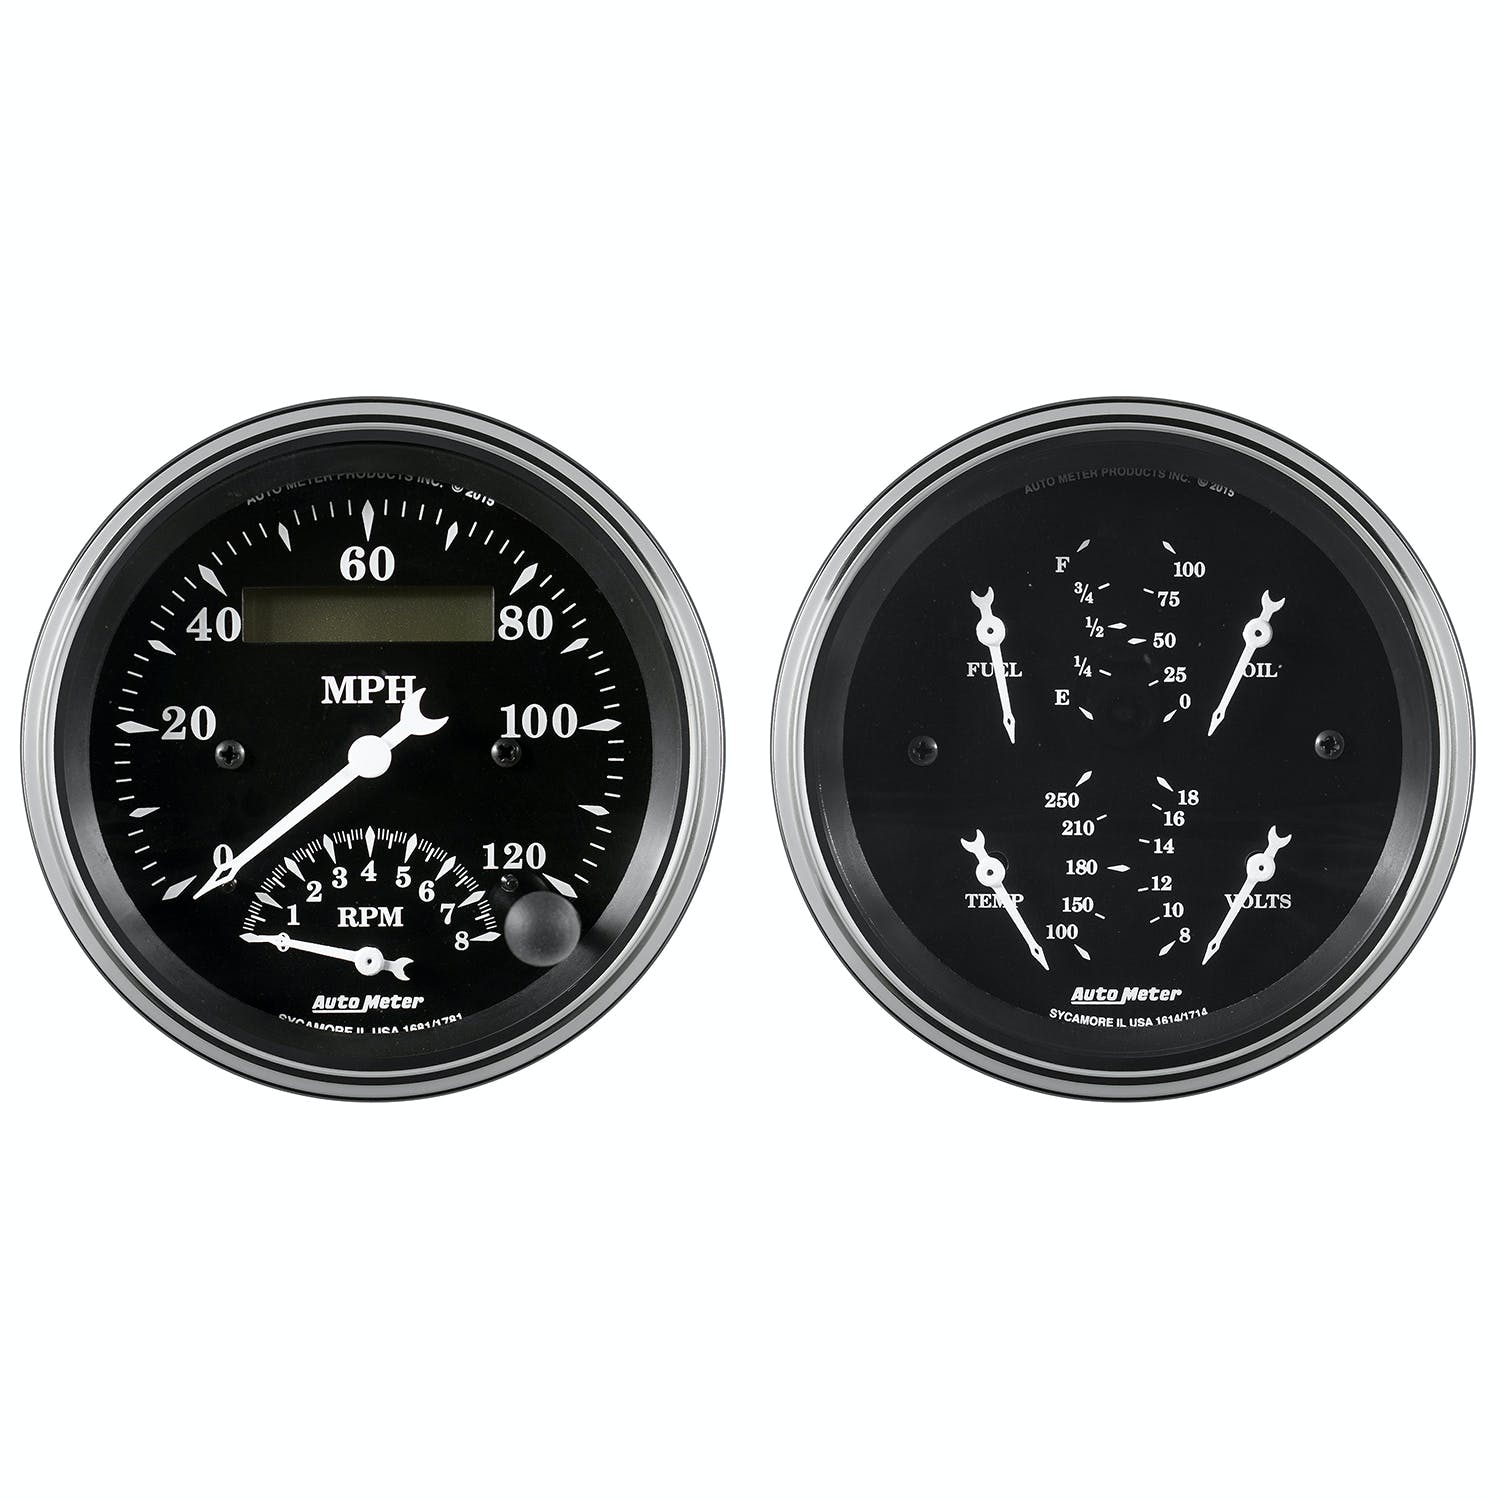 AutoMeter Products 1720 Quad and Tach/Speedometer Gauge Kit 3 3/8in, Old Tyme Black 2pc